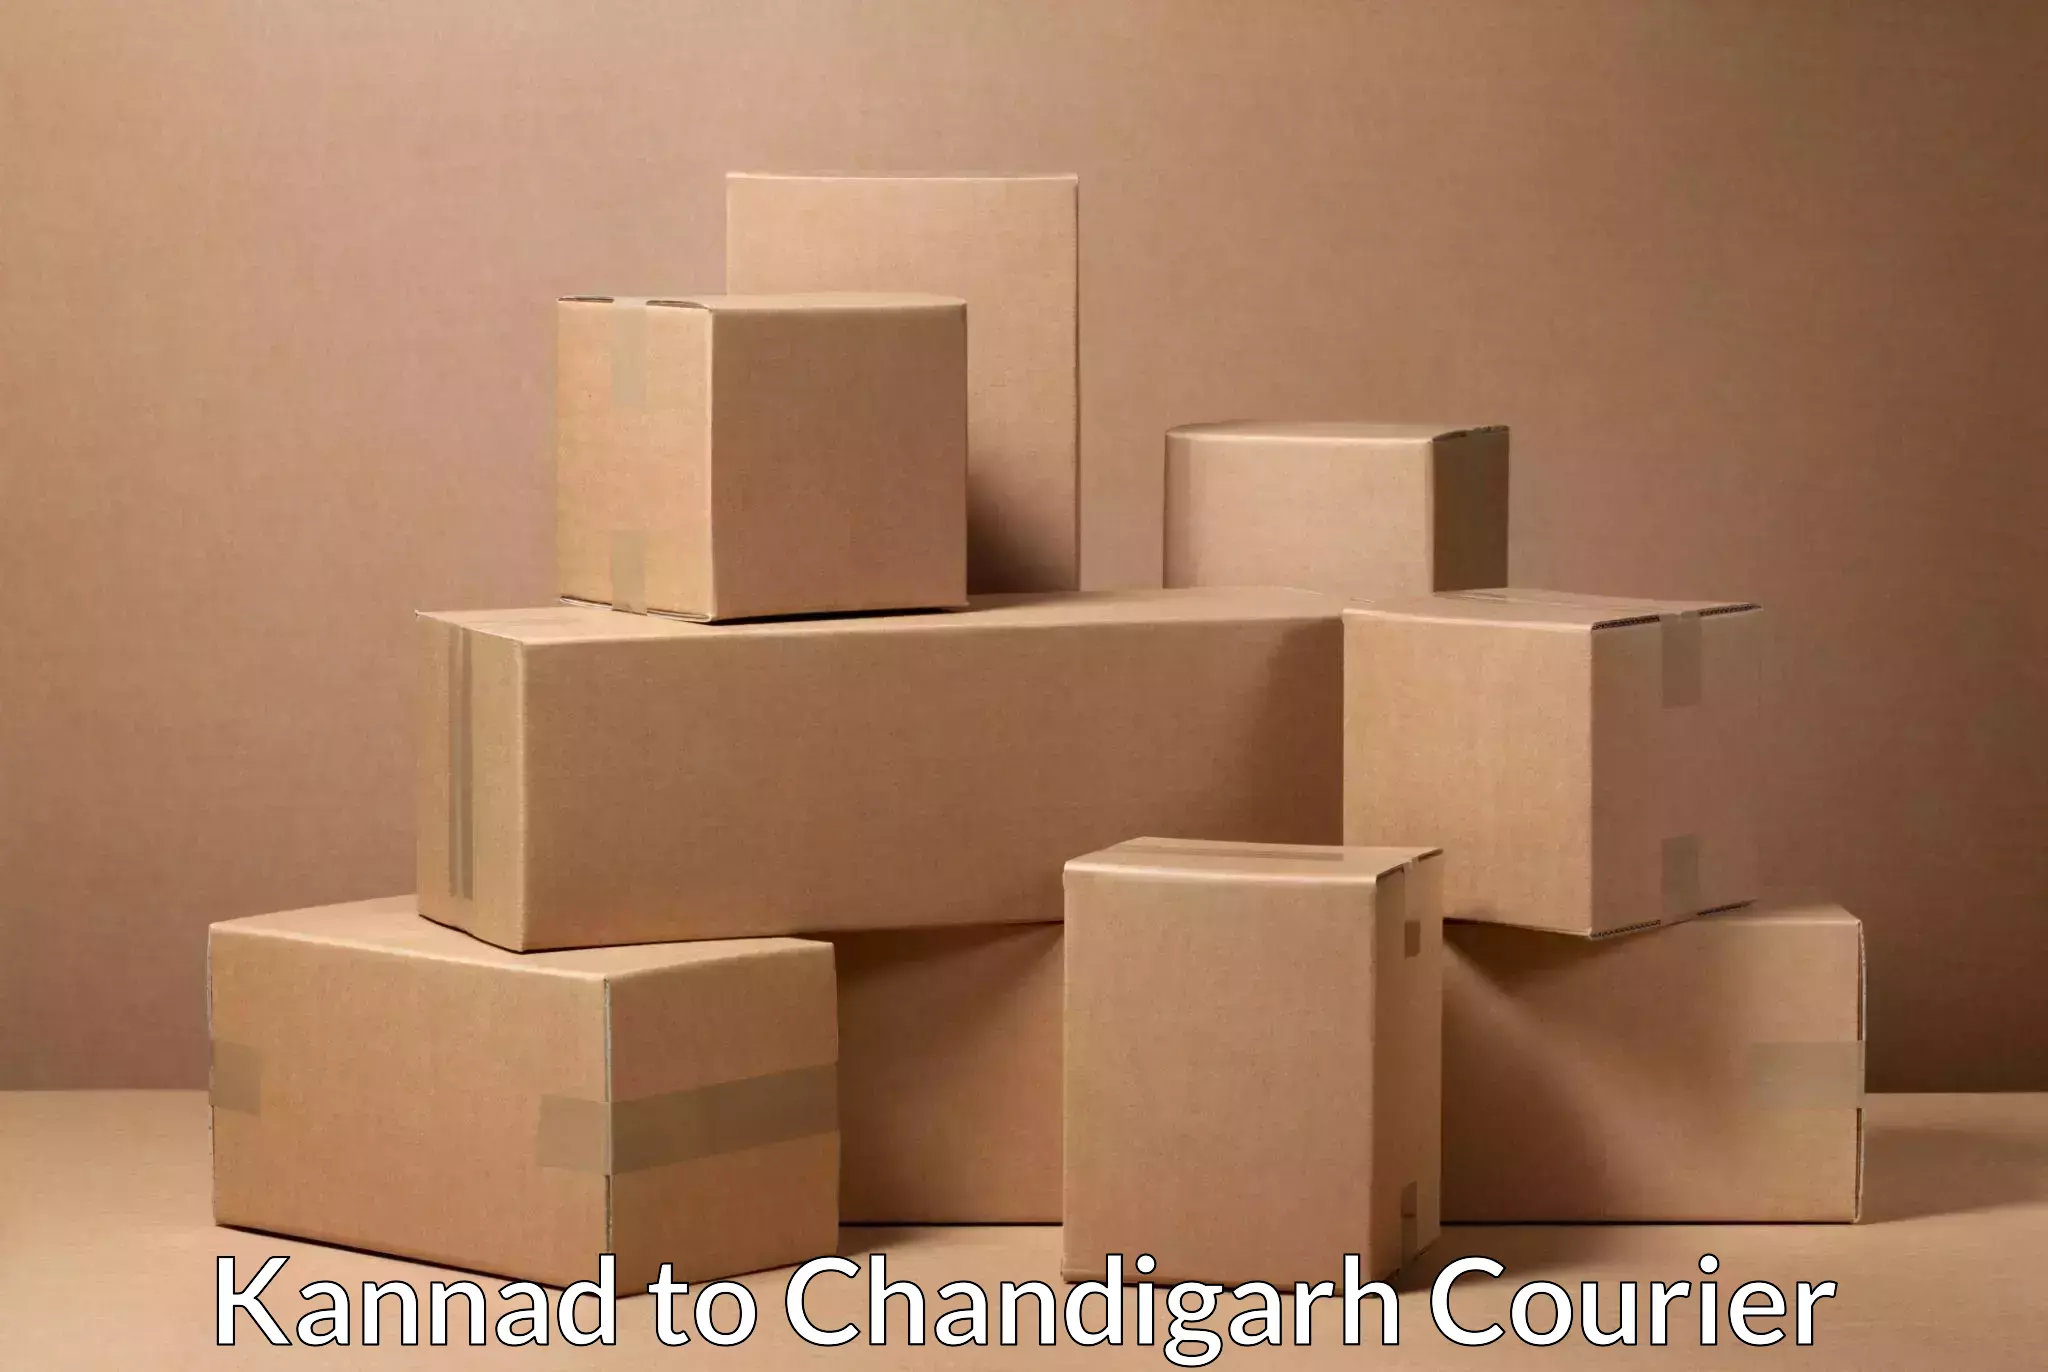 Cost-effective courier options Kannad to Chandigarh